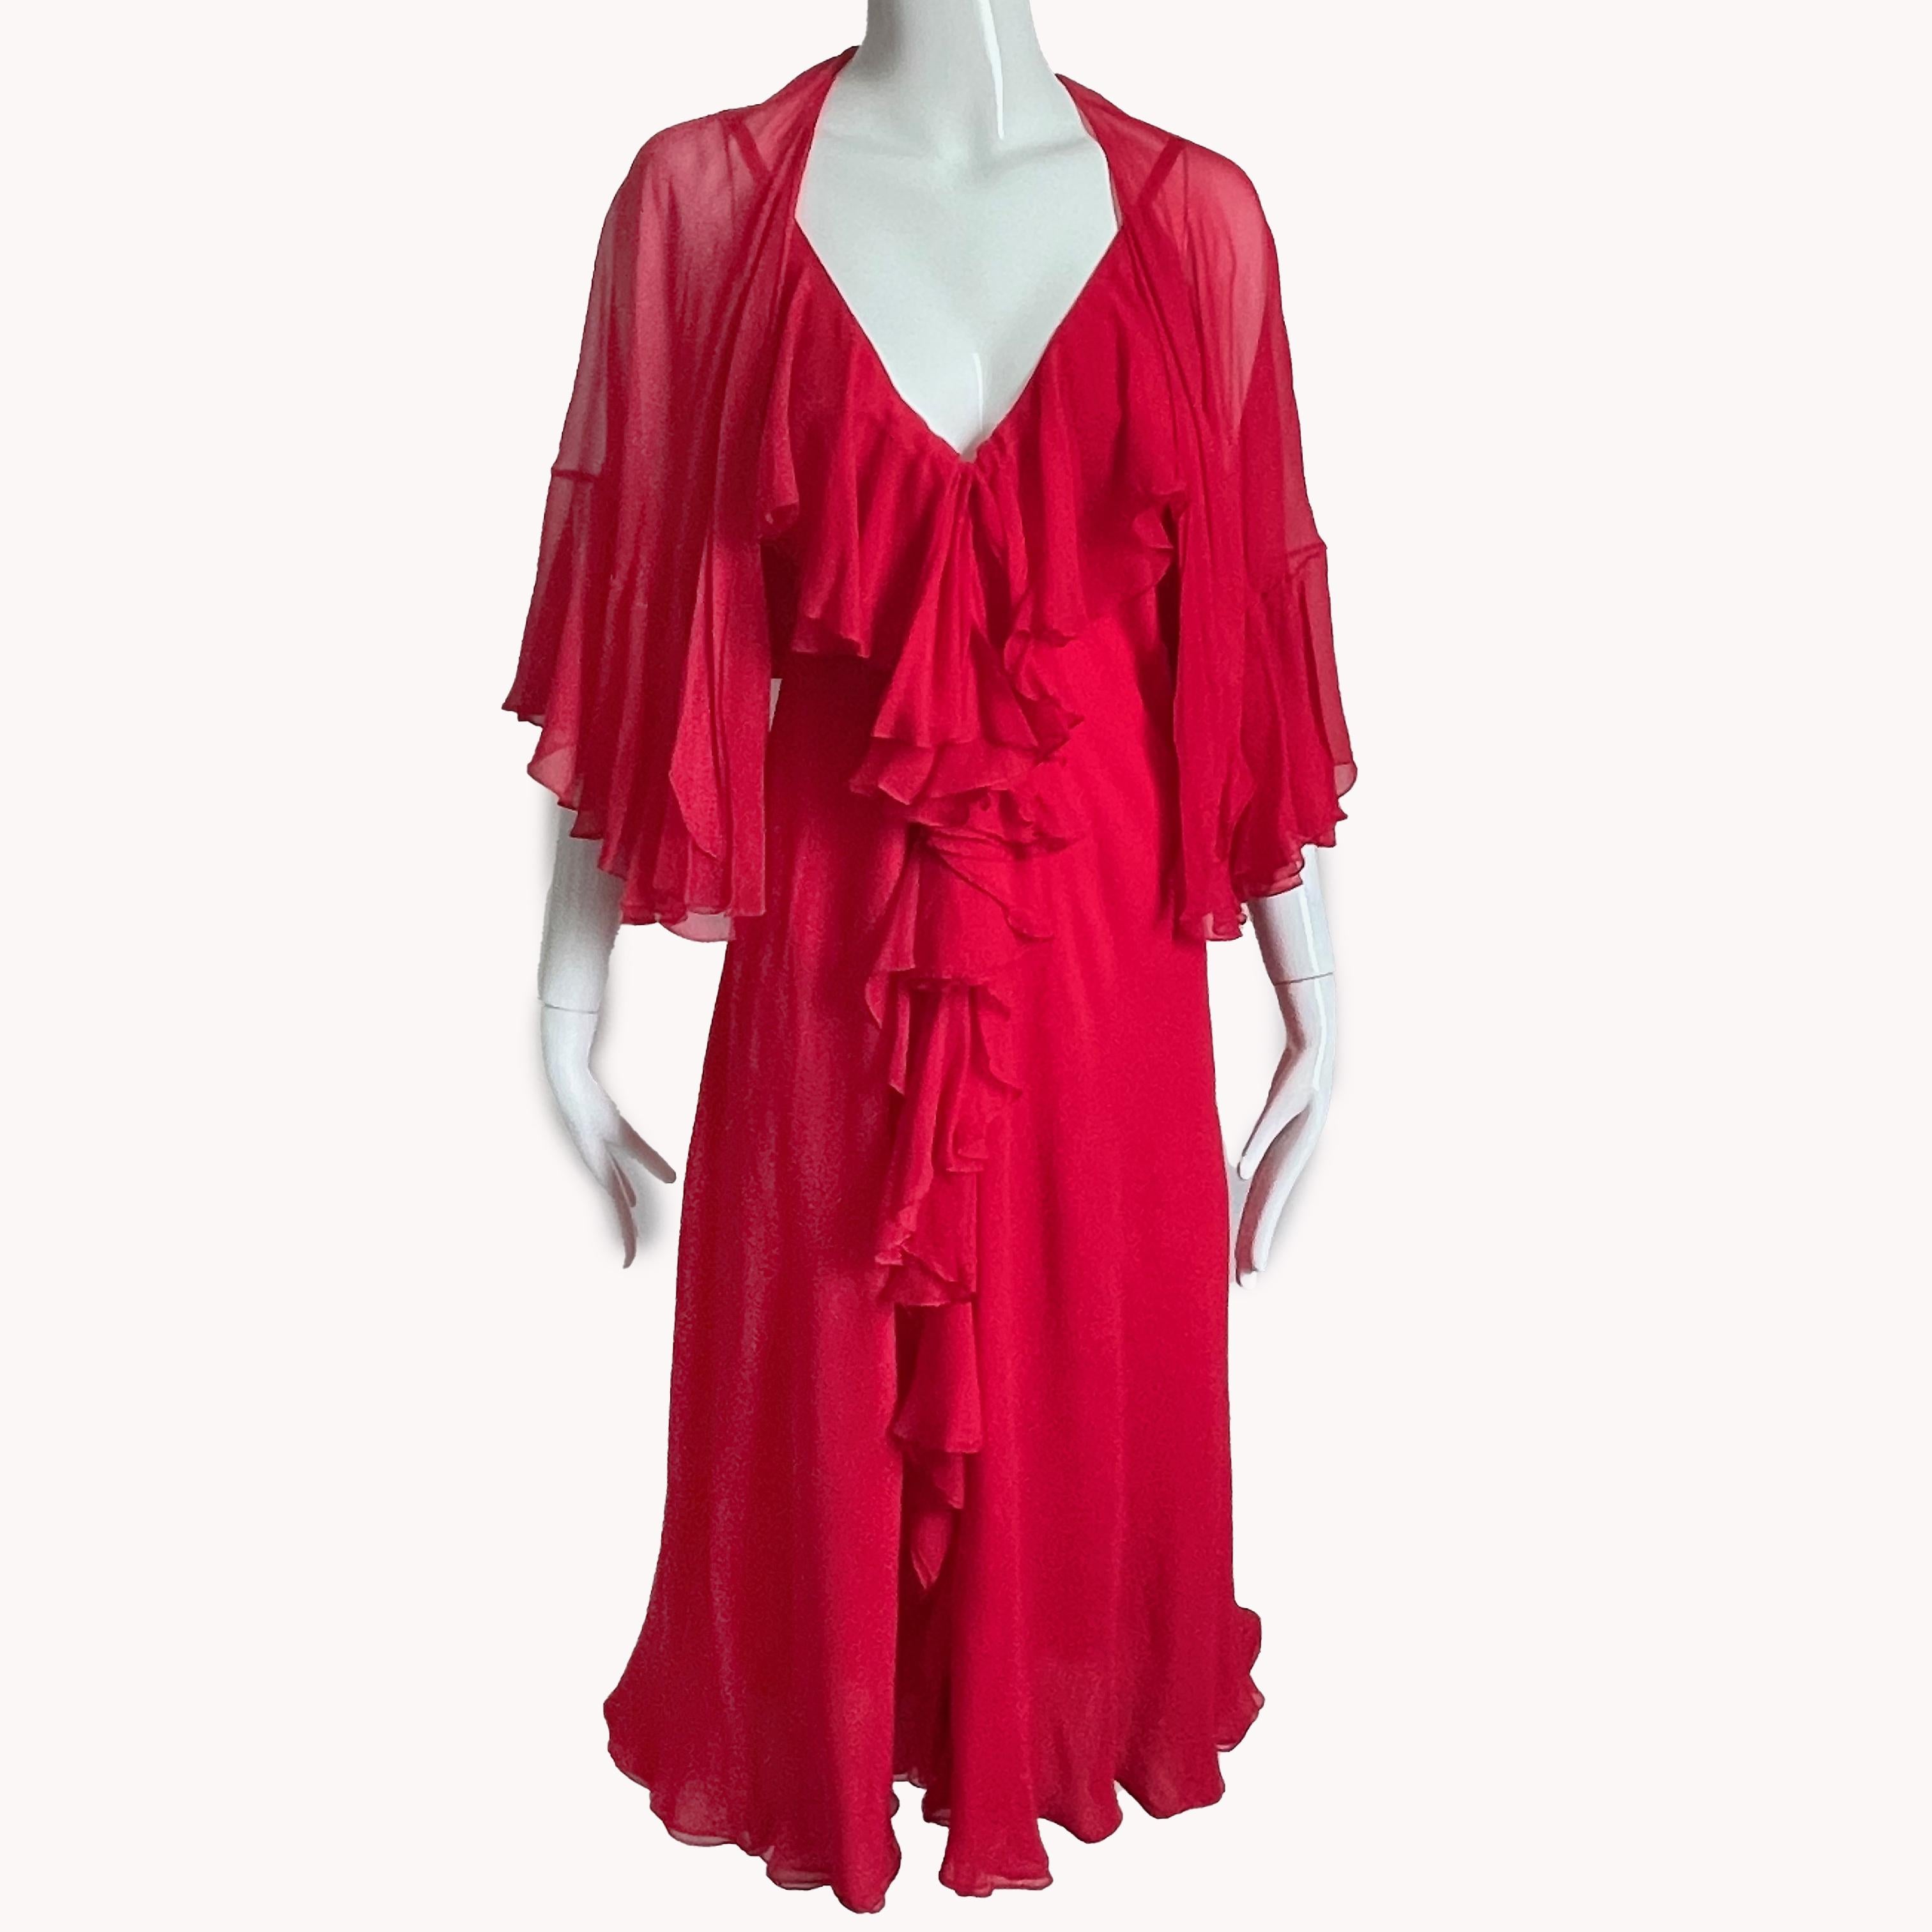 Authentic, preowned, vintage Pauline Trigère red ruffle cocktail dress with Shawl, made from silk chiffon, most likely in the early 70s. 

A true vintage piece with a studio 54 or disco vibe!  Both pieces are made from red silk chiffon; the